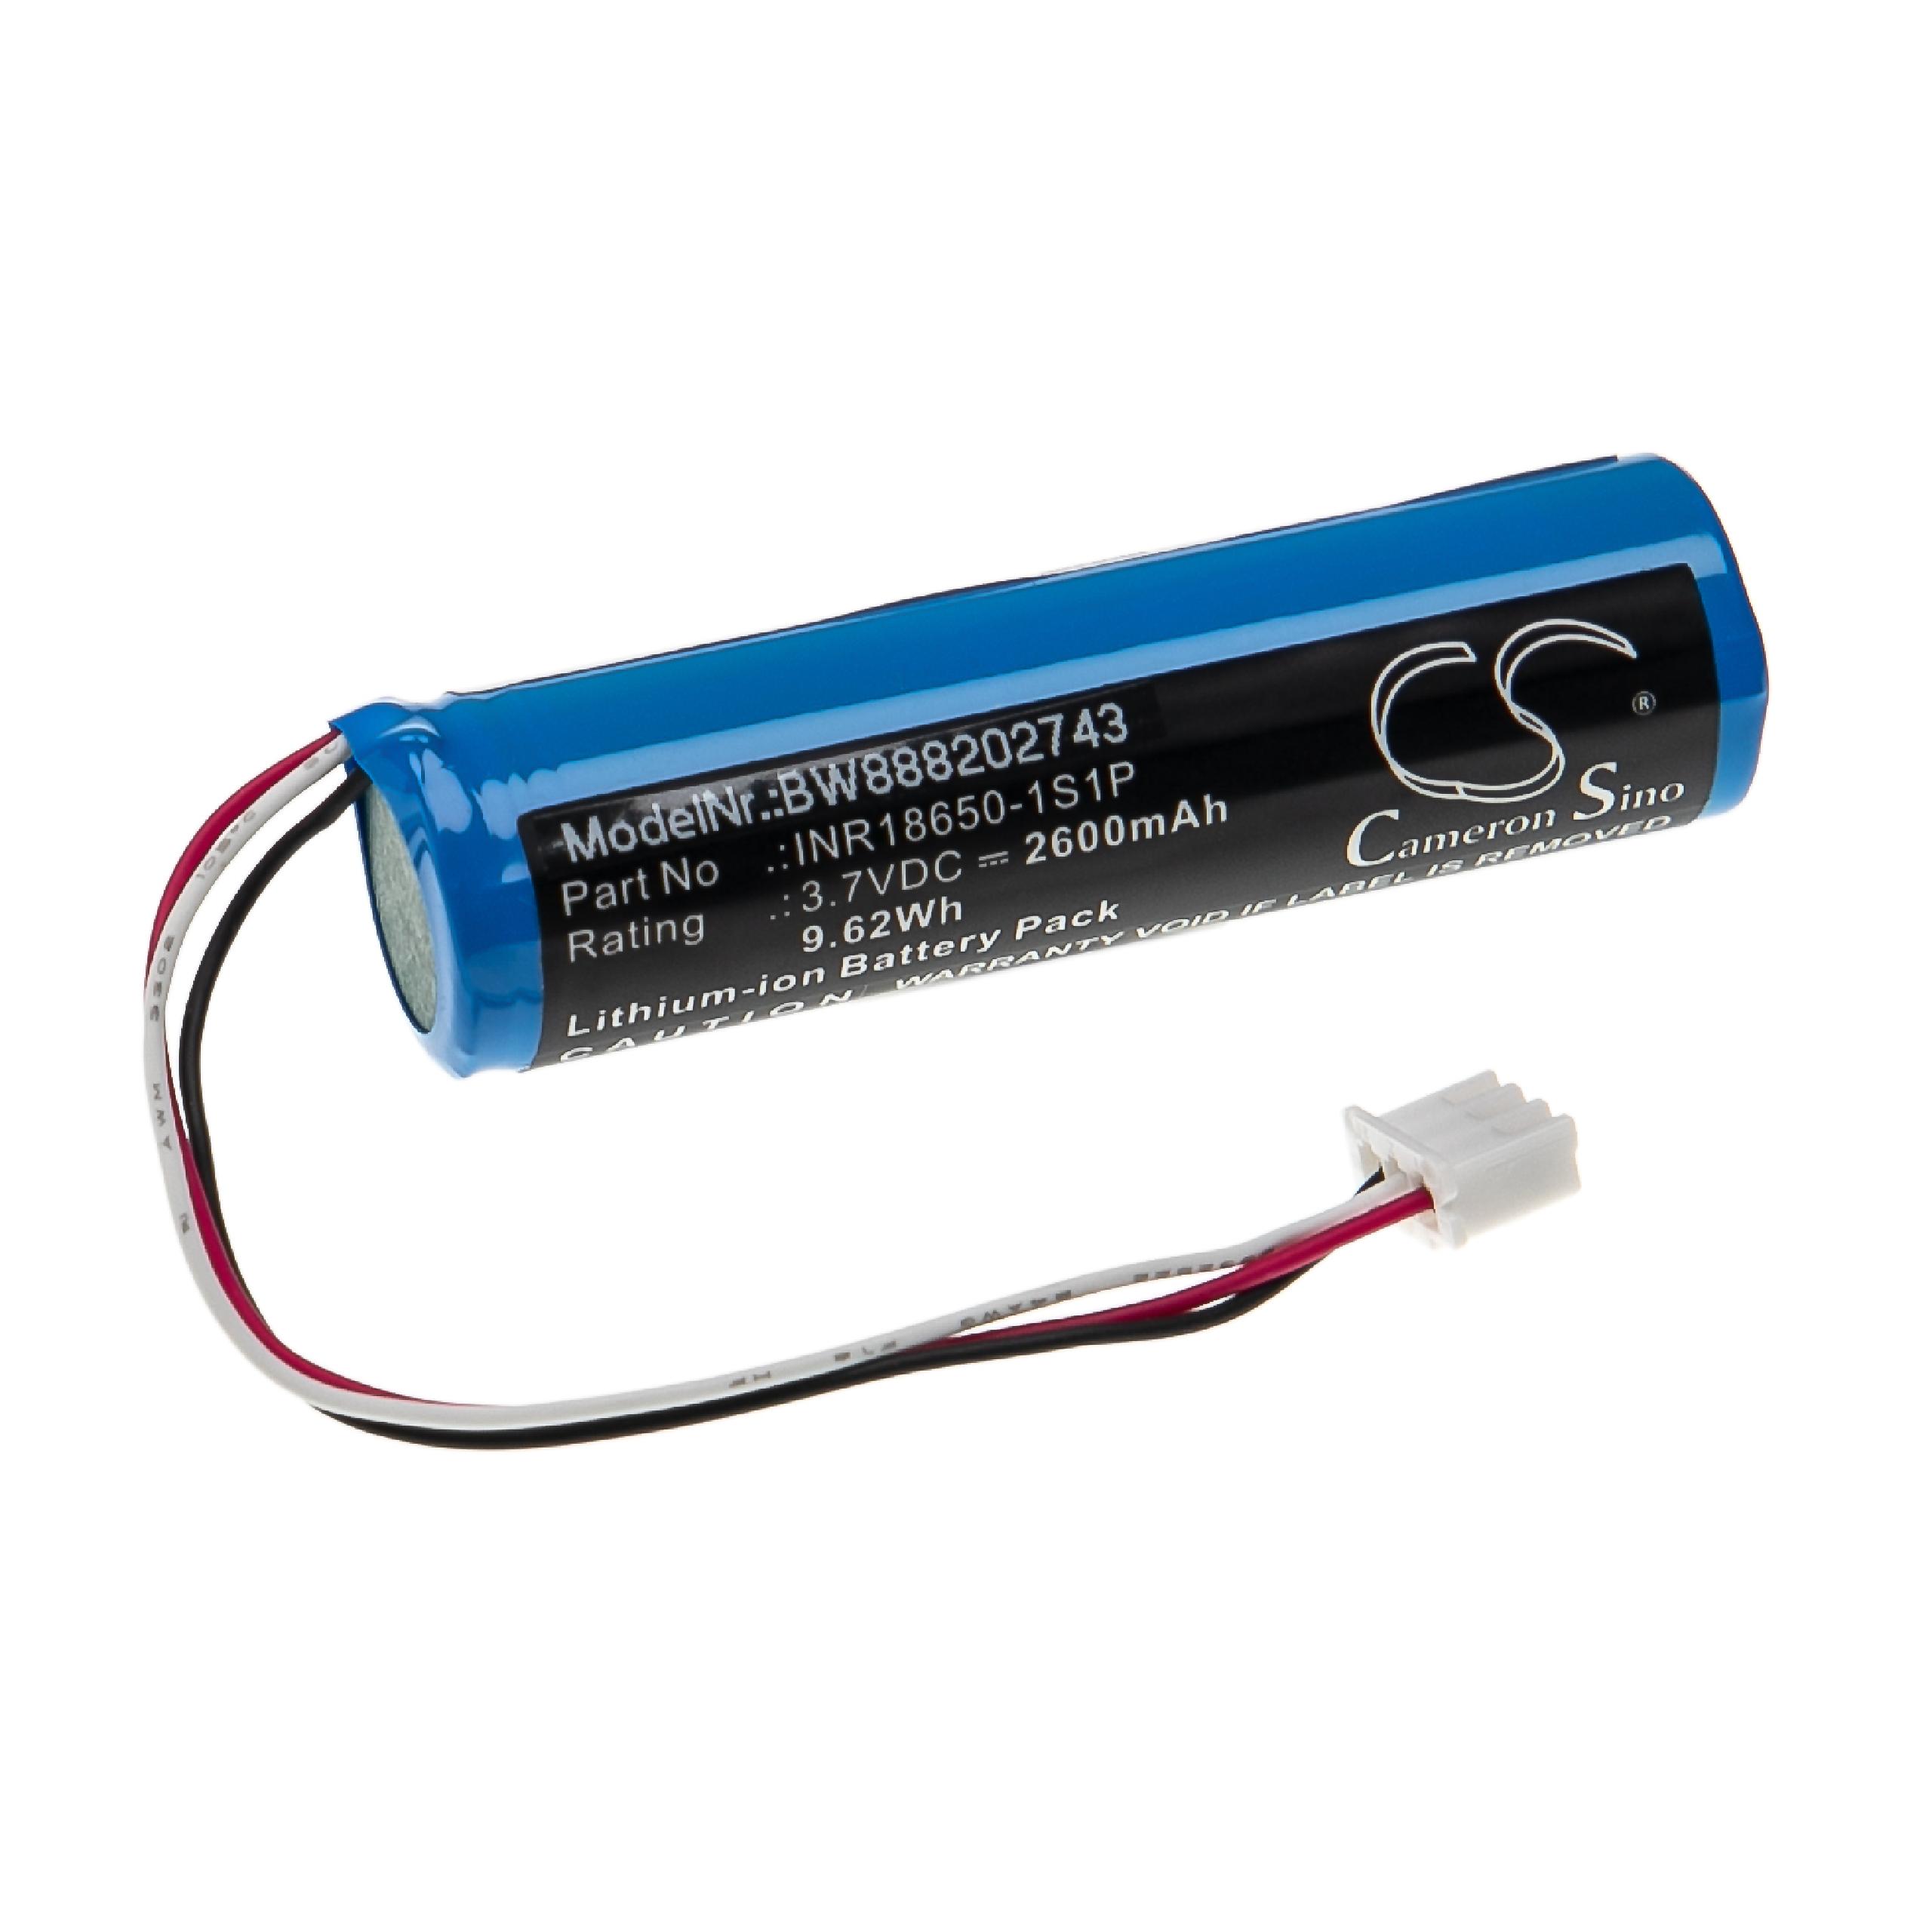 Laser Helmet Battery Replacement for Theradome INR18650-1S1P - 2600mAh 3.7V Li-Ion